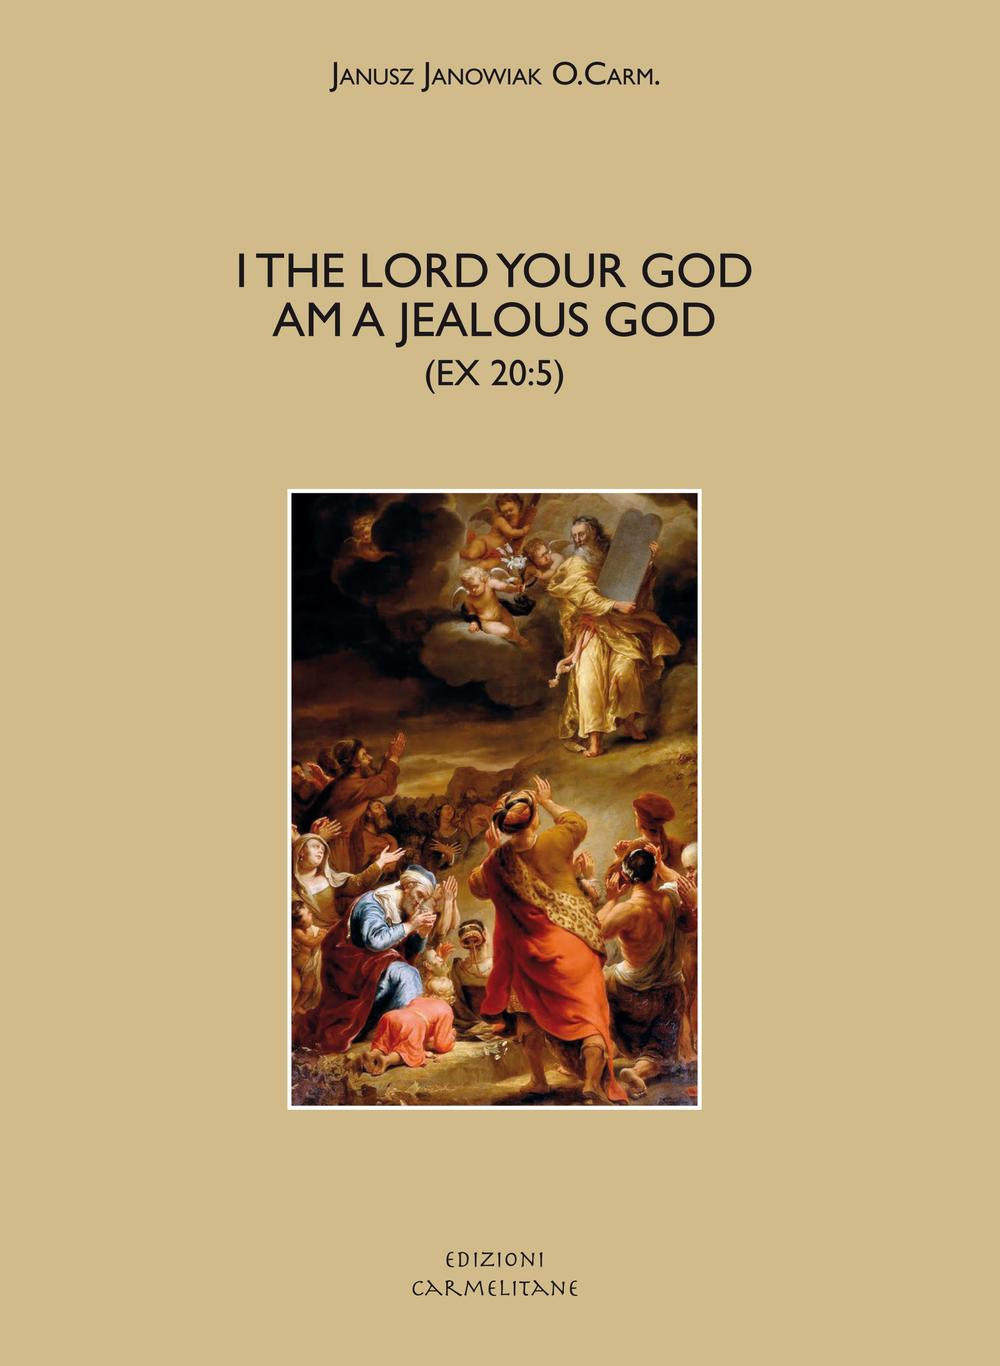 «I the lord your God am a jealous God» (Ex 20.5). A historical, exegetical, and theological investigation of divine zeal and jealousy in the Old Testament